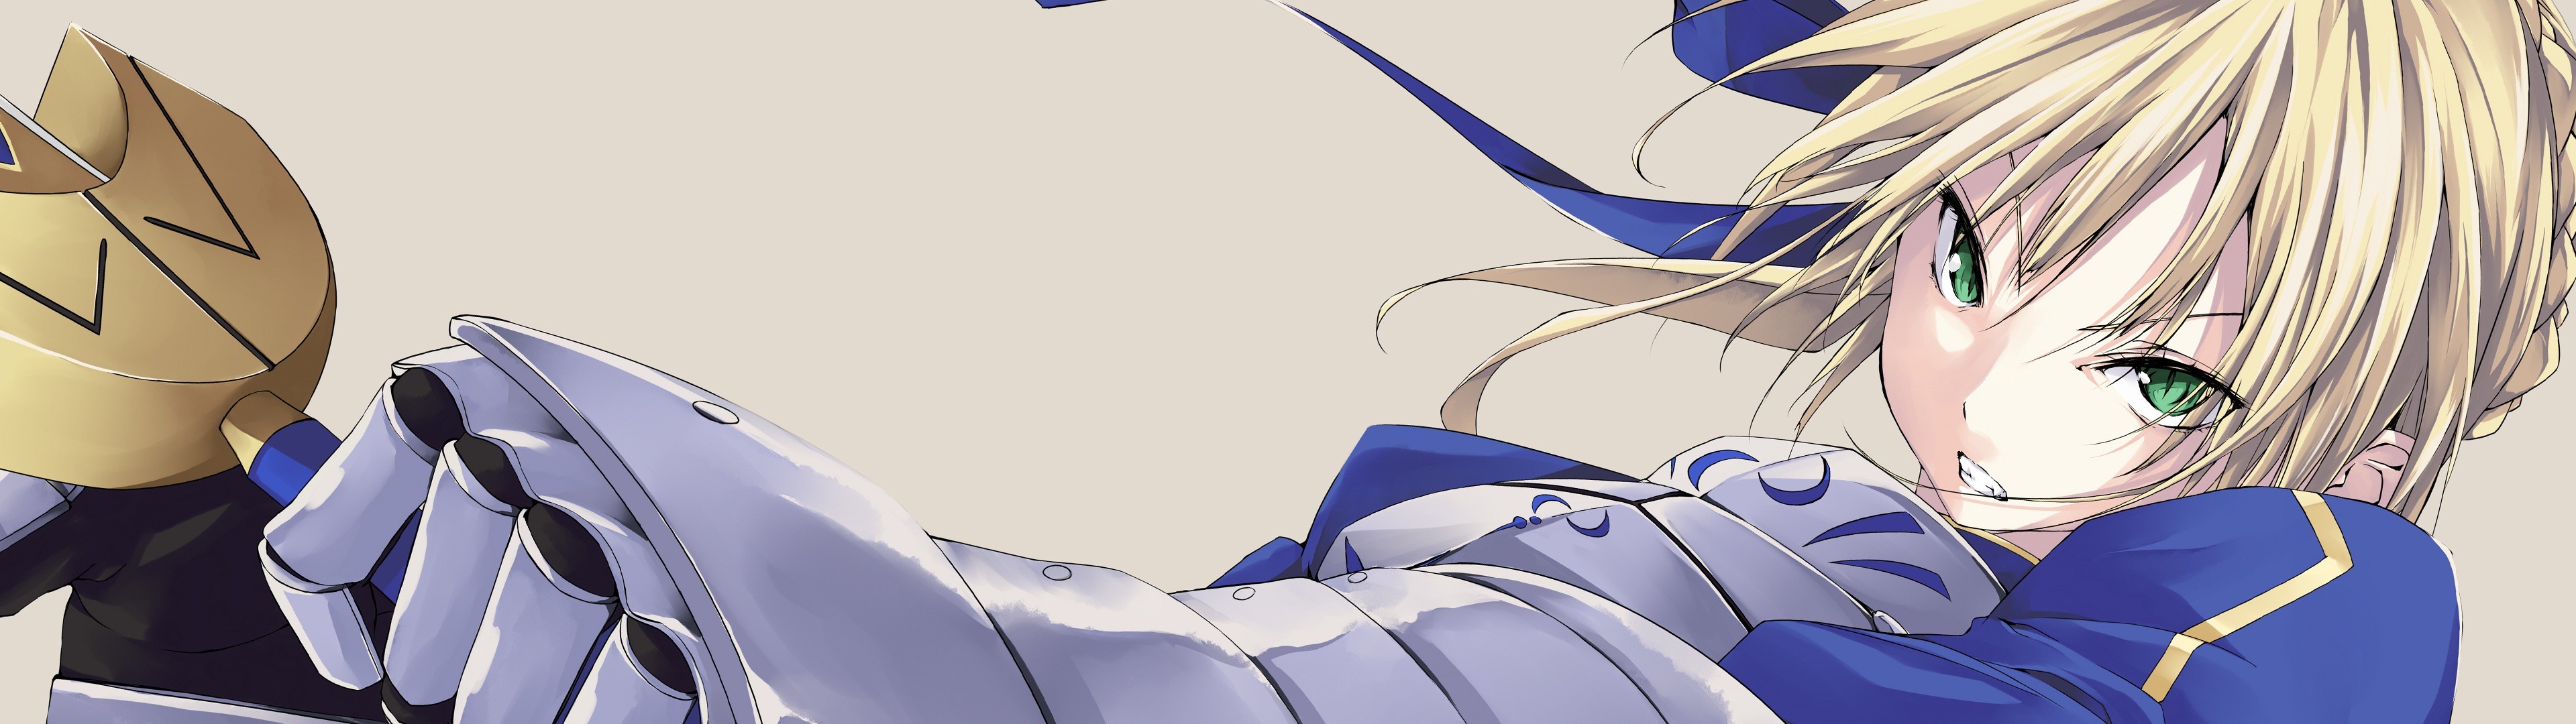 Anime 3840x1080 anime Saber Fate series anime girls green eyes blonde simple background white background